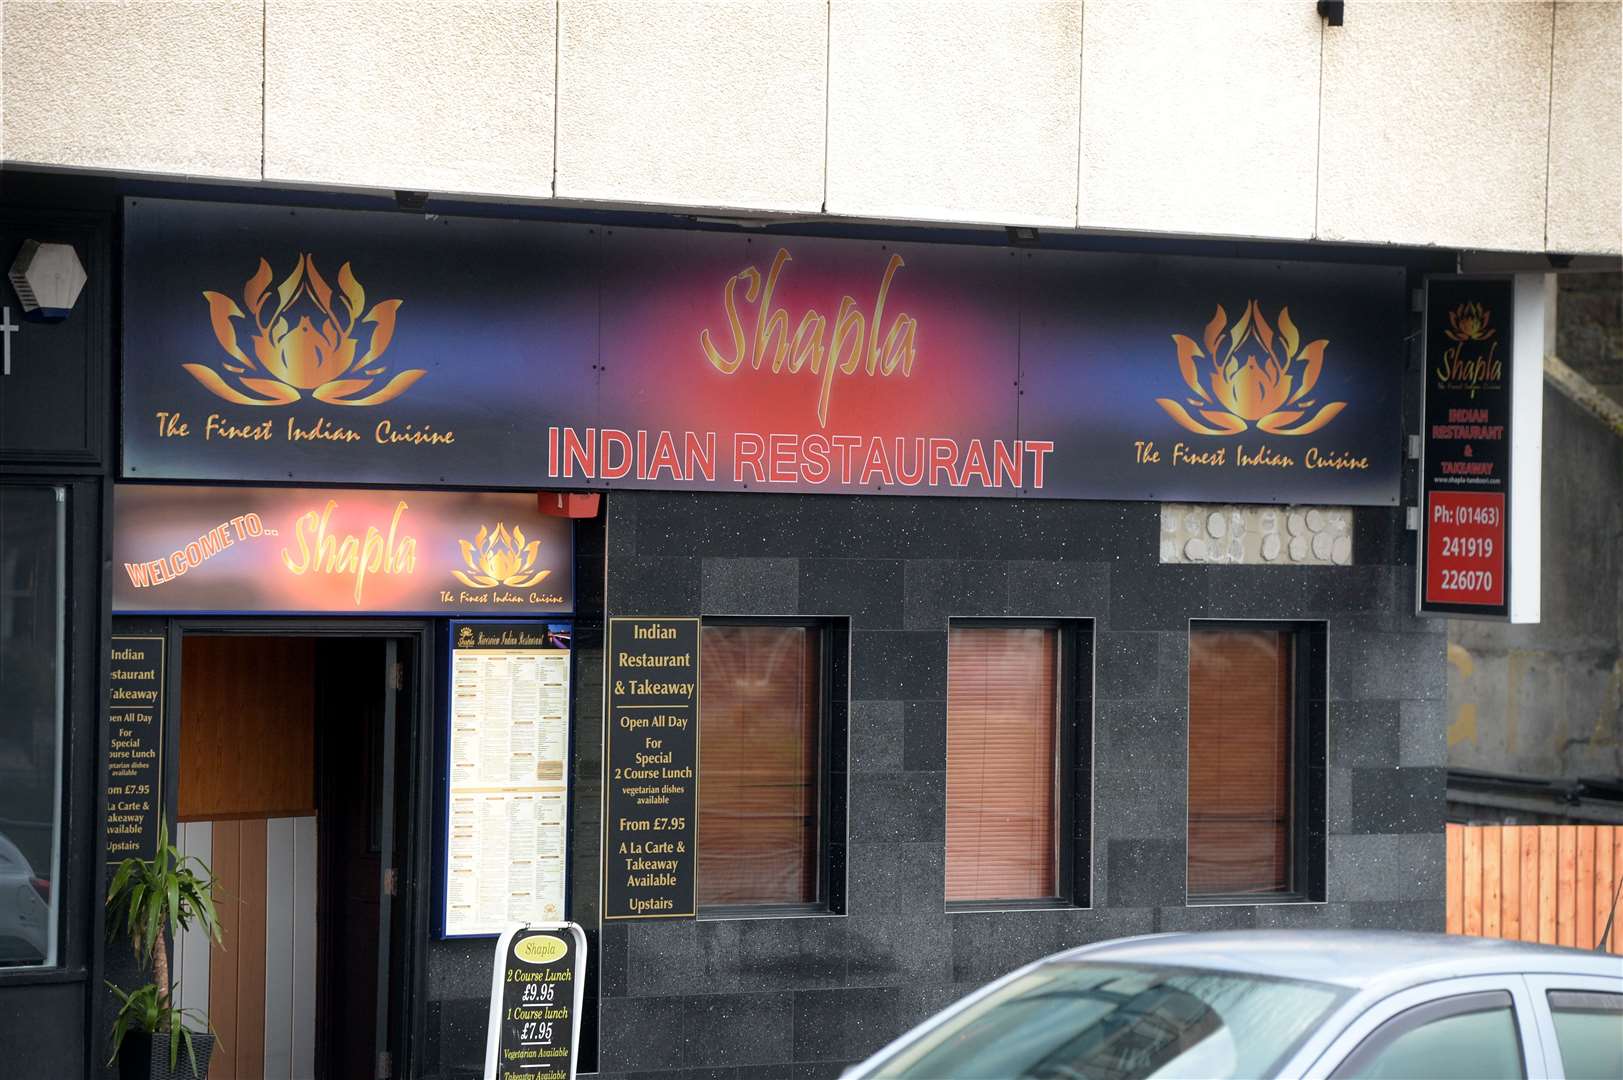 A man attacked his father at the Shapla restaurant in Inverness.